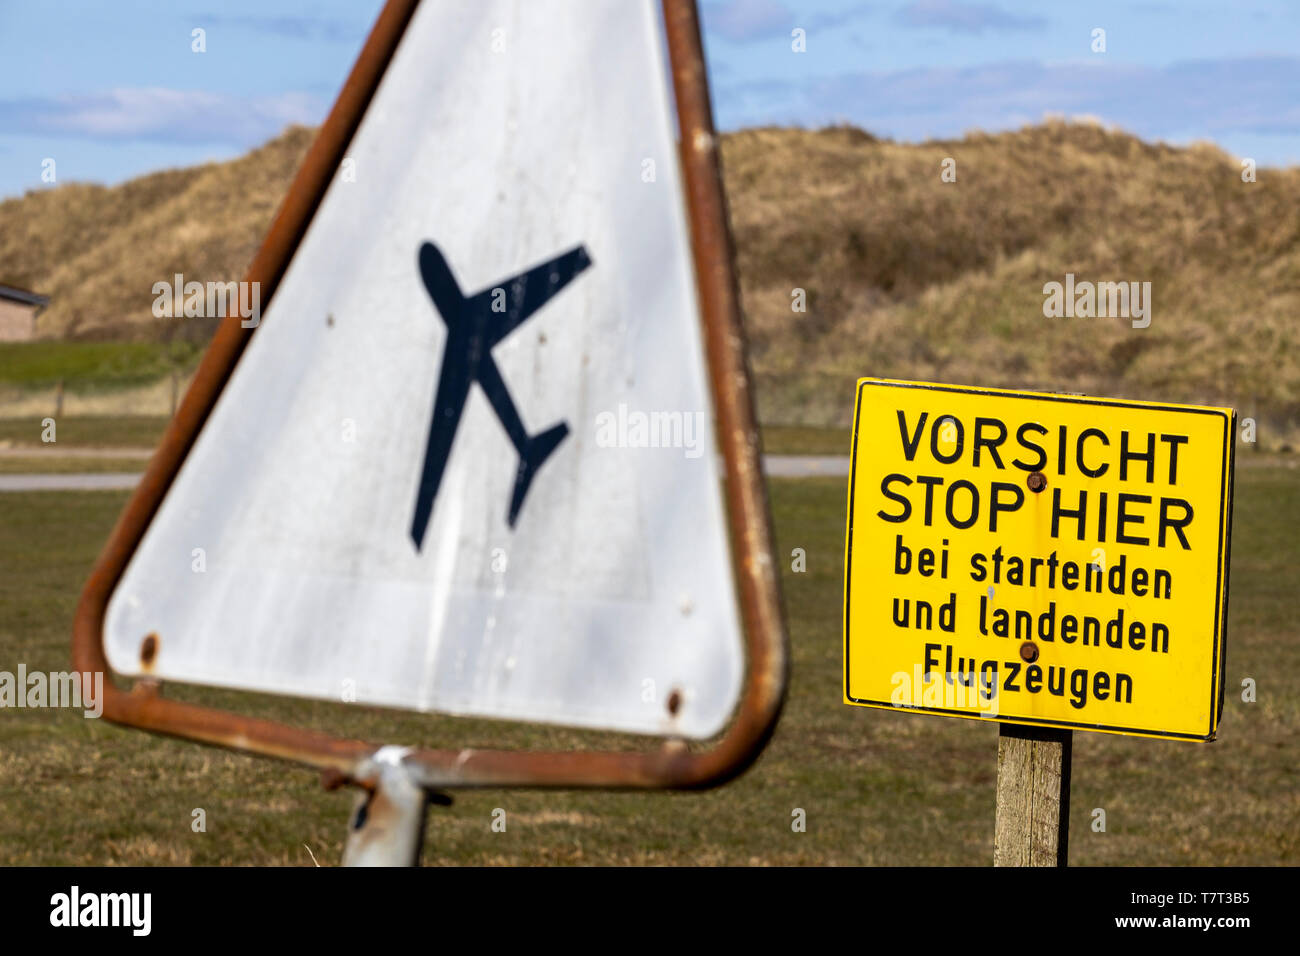 North Sea island of Juist, East Frisia, airfield Juist, small airfield, shuttle plane from the mainland, private planes Lower Saxony, Germany, Stock Photo